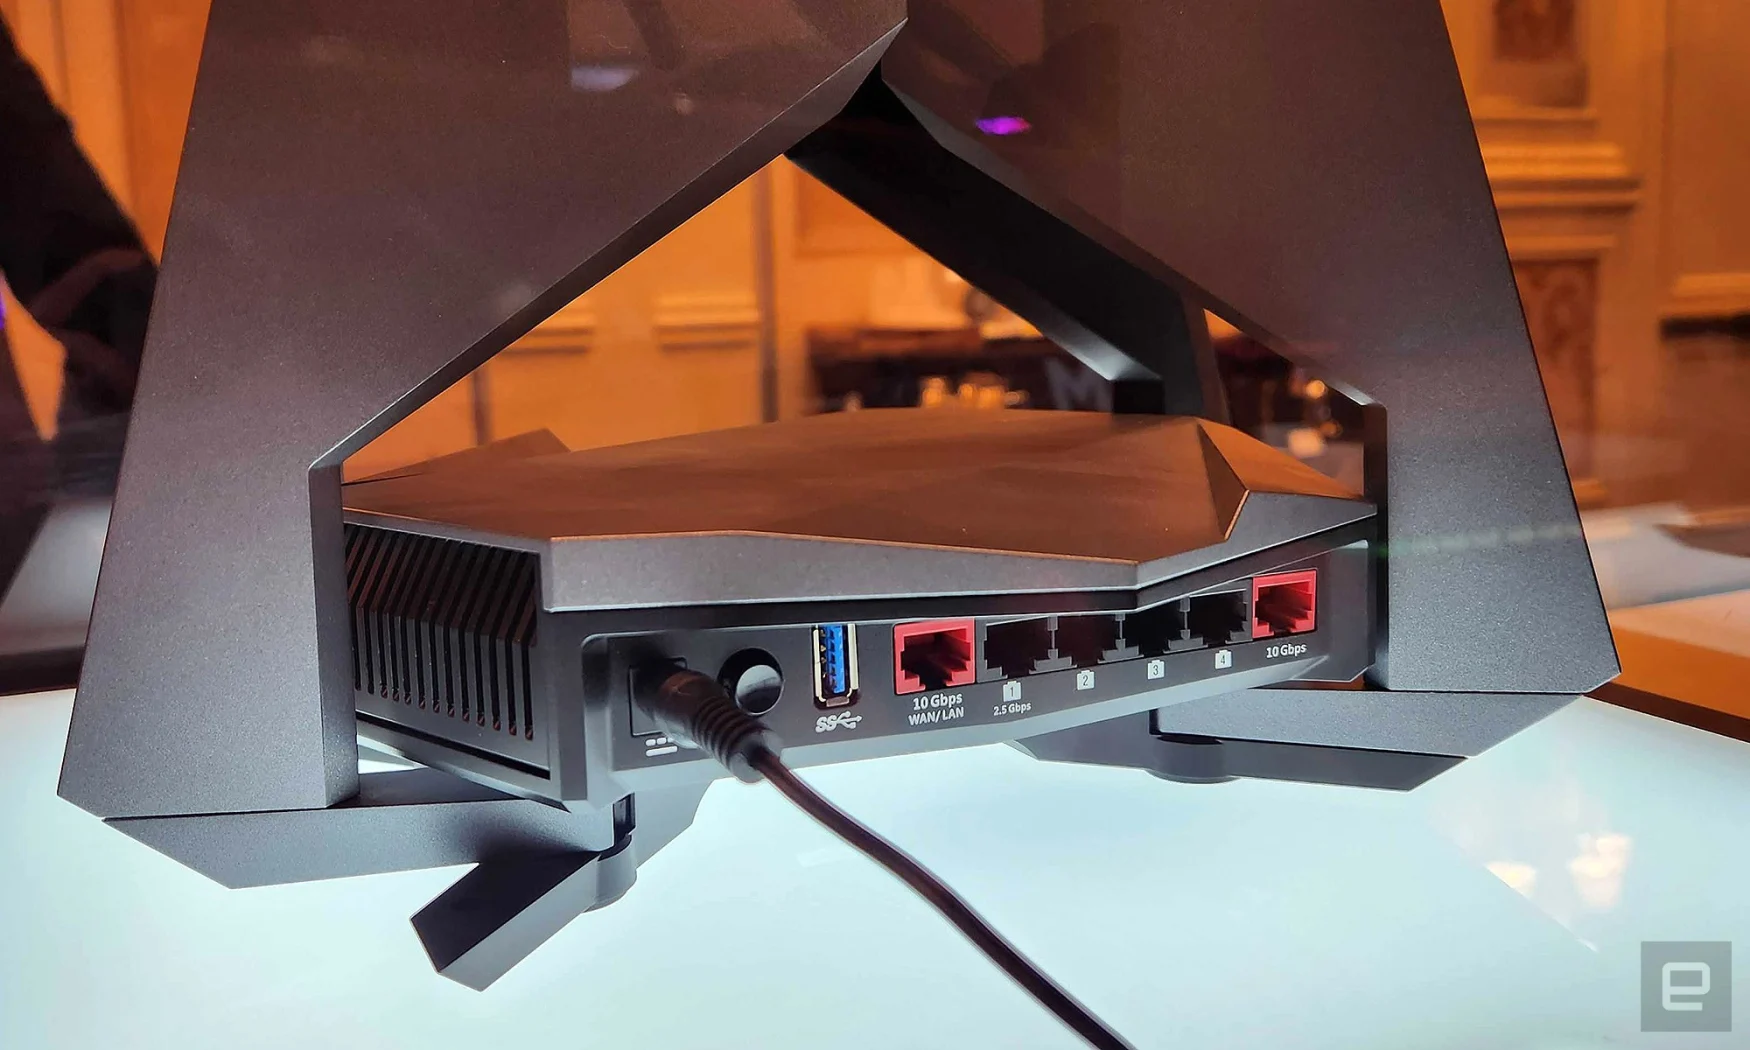 For people who still care about wired internet connections, the RadiX BE22000 Turbo also includes two 10 gigabit Ethernet ports along with four 2.5 gigabit connections. 